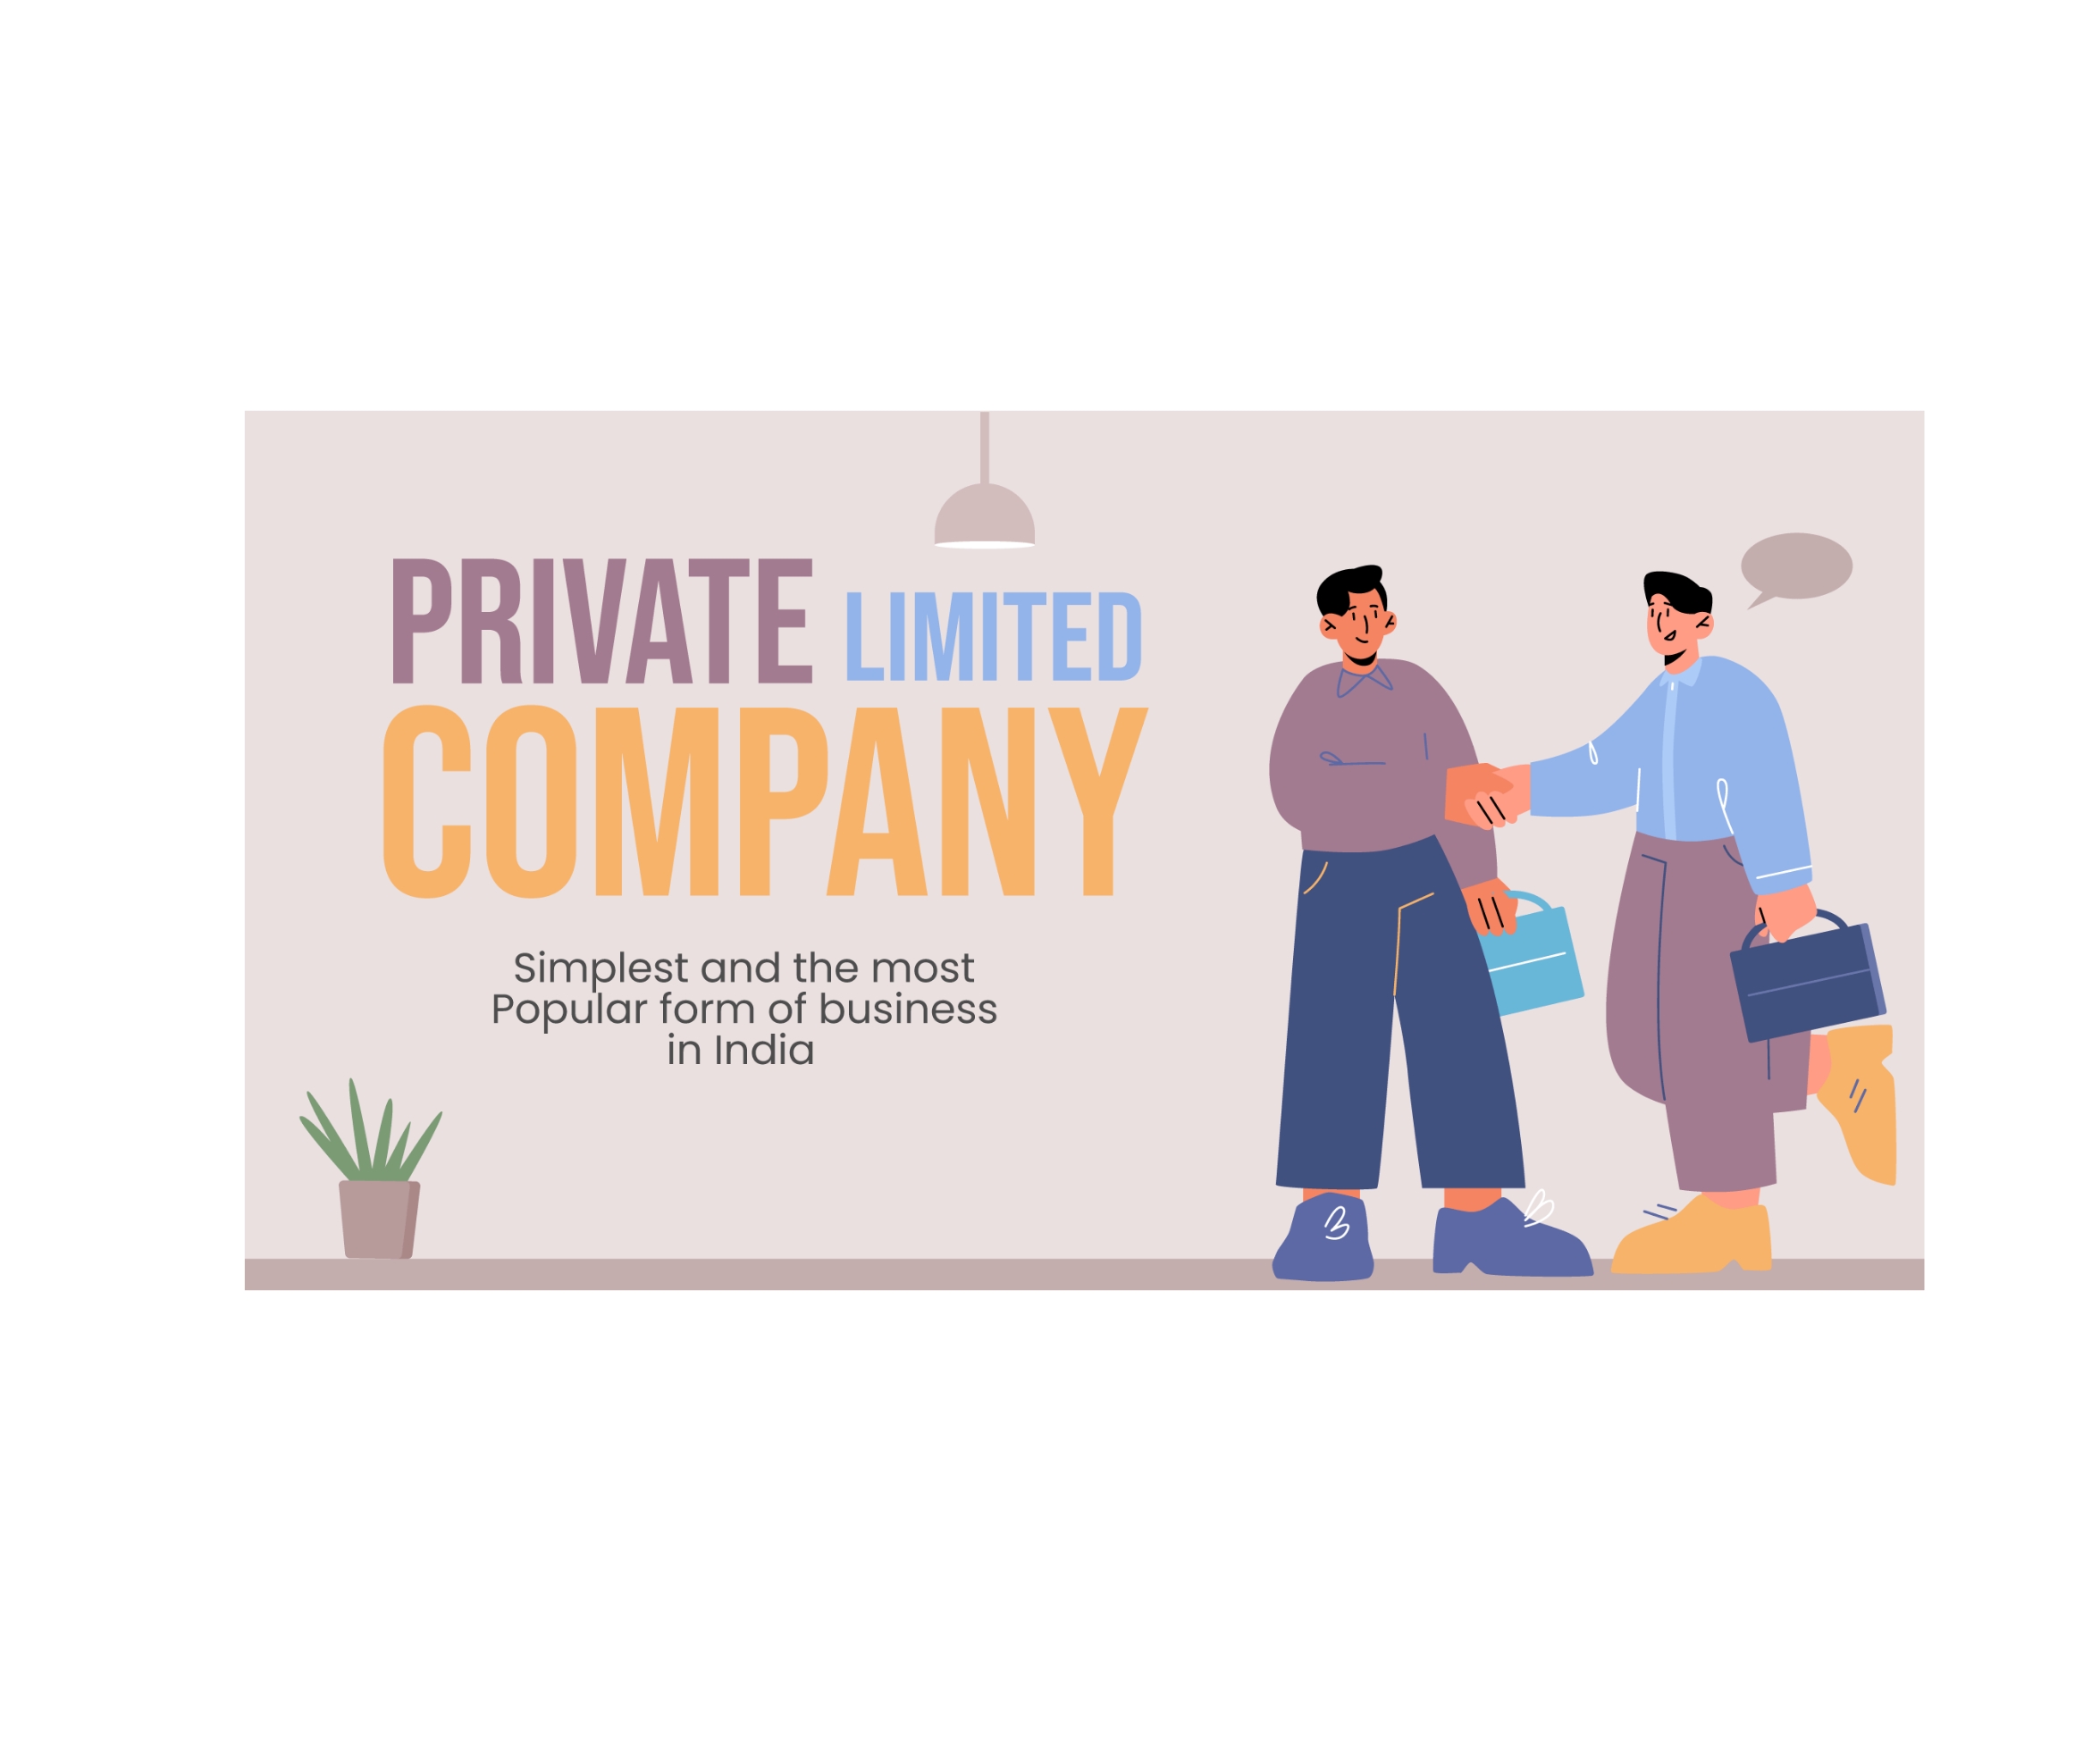 Adding a Director in a Pvt Ltd Co